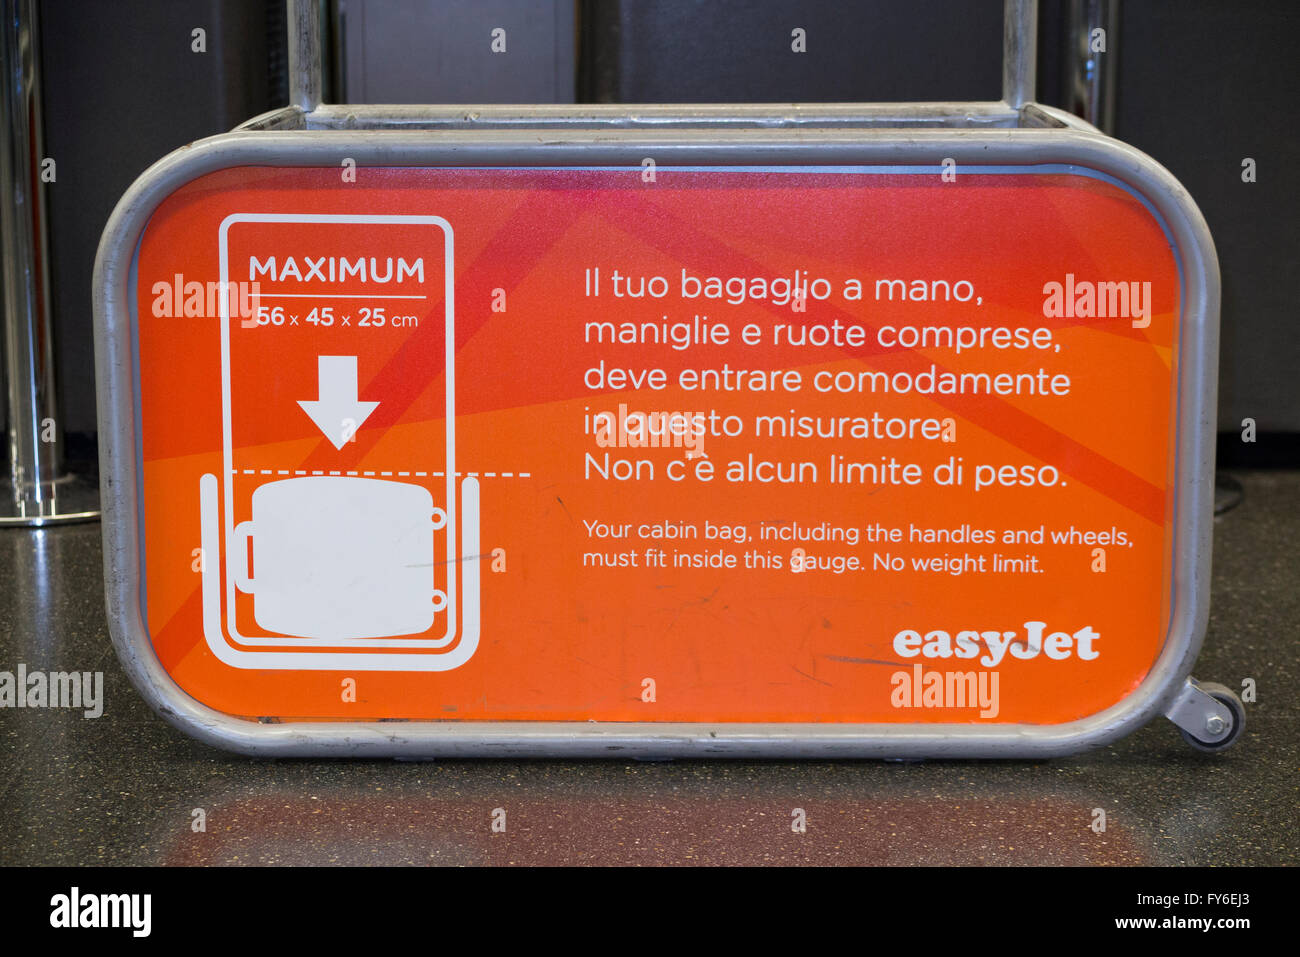 Easyjet bag size frame cage tester to measure dimensions of passenger hand  held carry on flight hand luggage Milan Airport Italy Stock Photo - Alamy